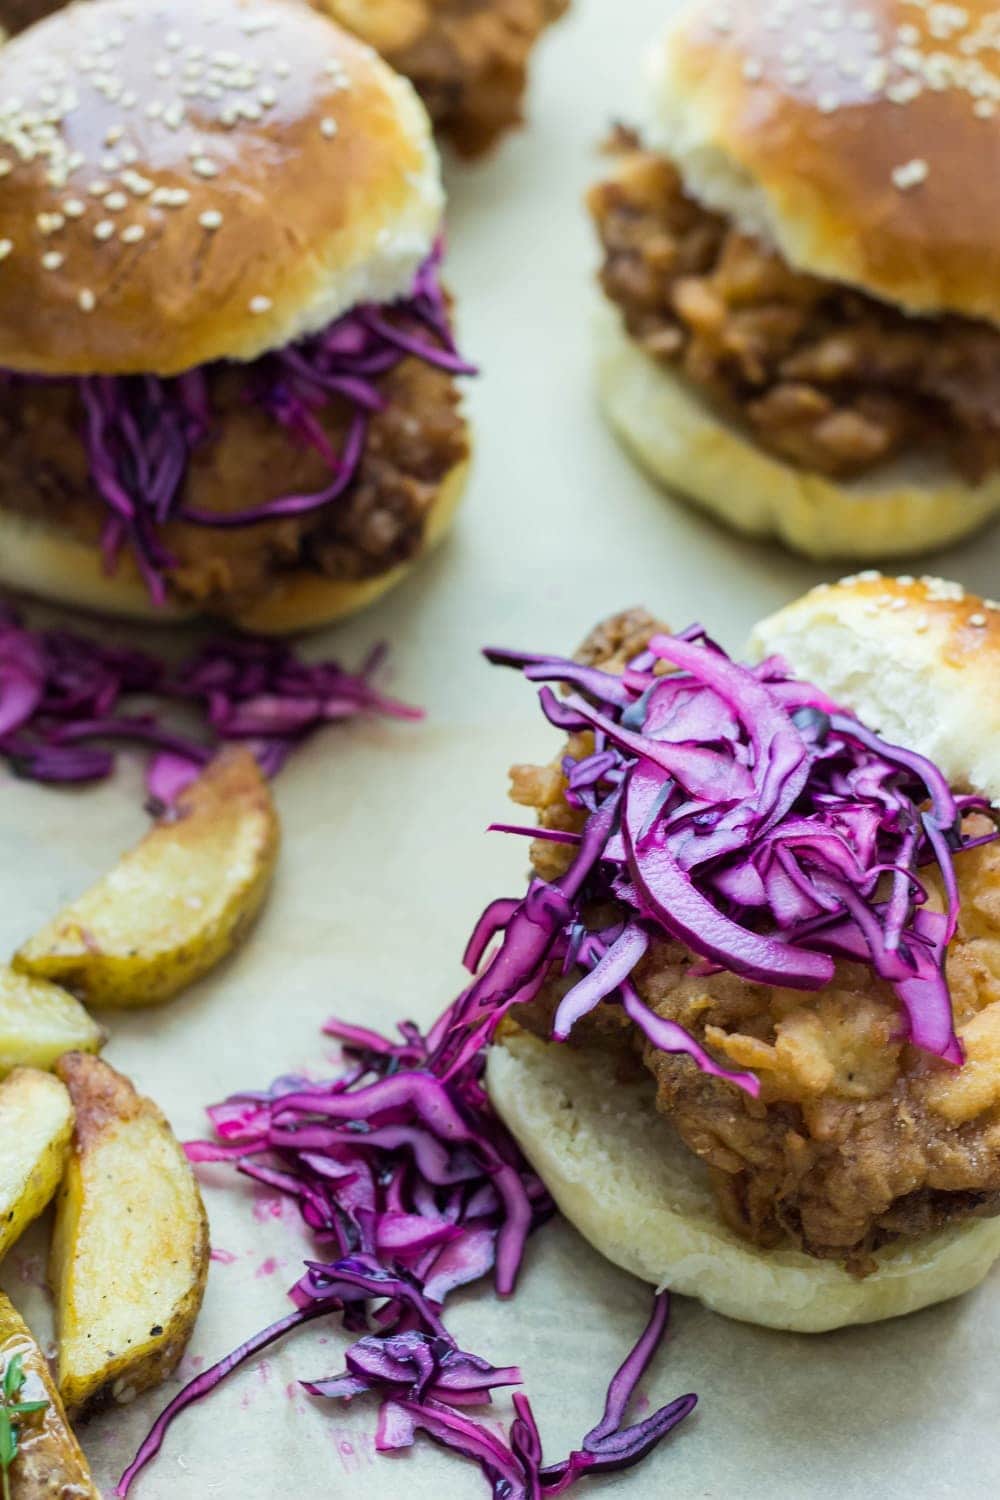 Oh man, fried chicken is just the best isn't it? Especially these buttermilk fried chicken sandwiches with cabbage slaw and sriracha mayo!